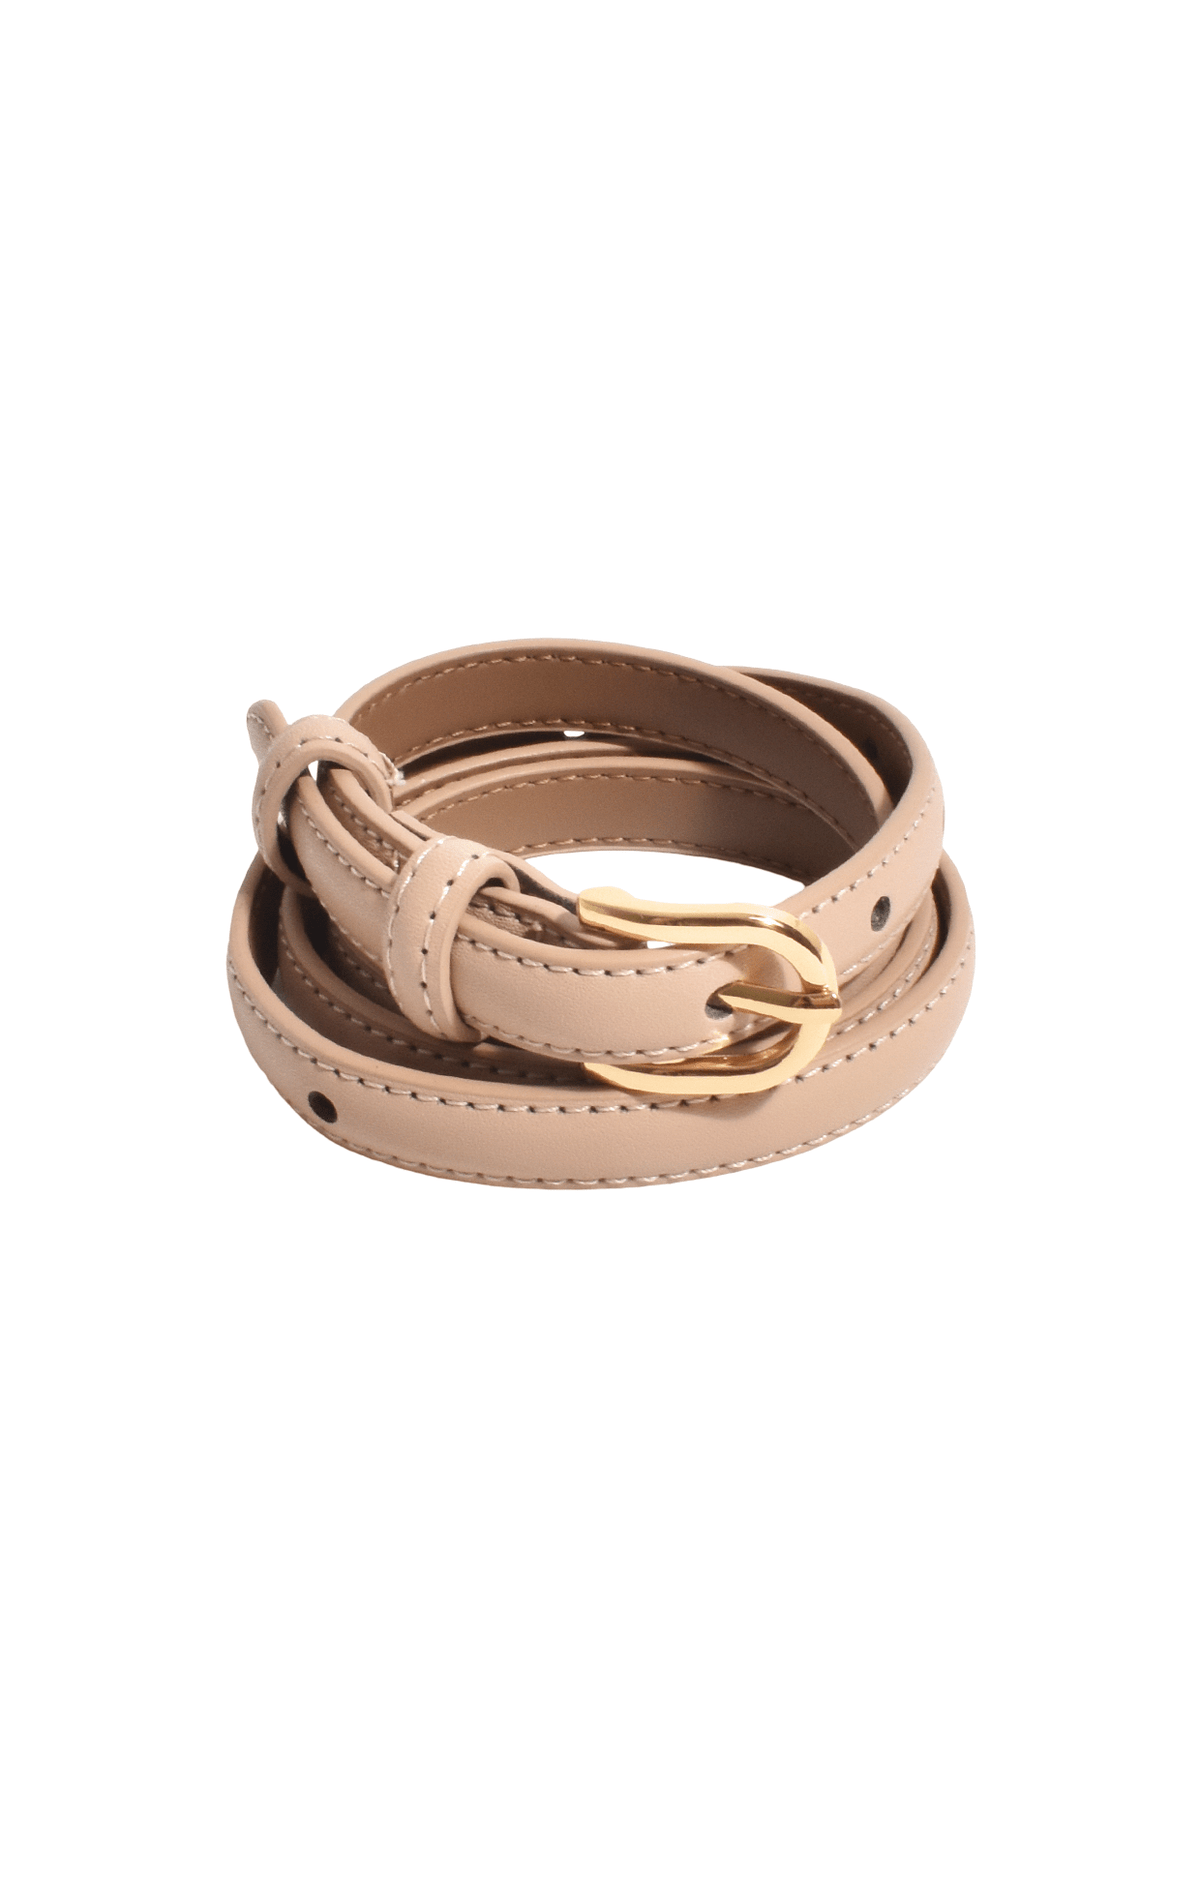 Belts OS / NUDE BRIONY THIN JEANS BELT IN NUDE